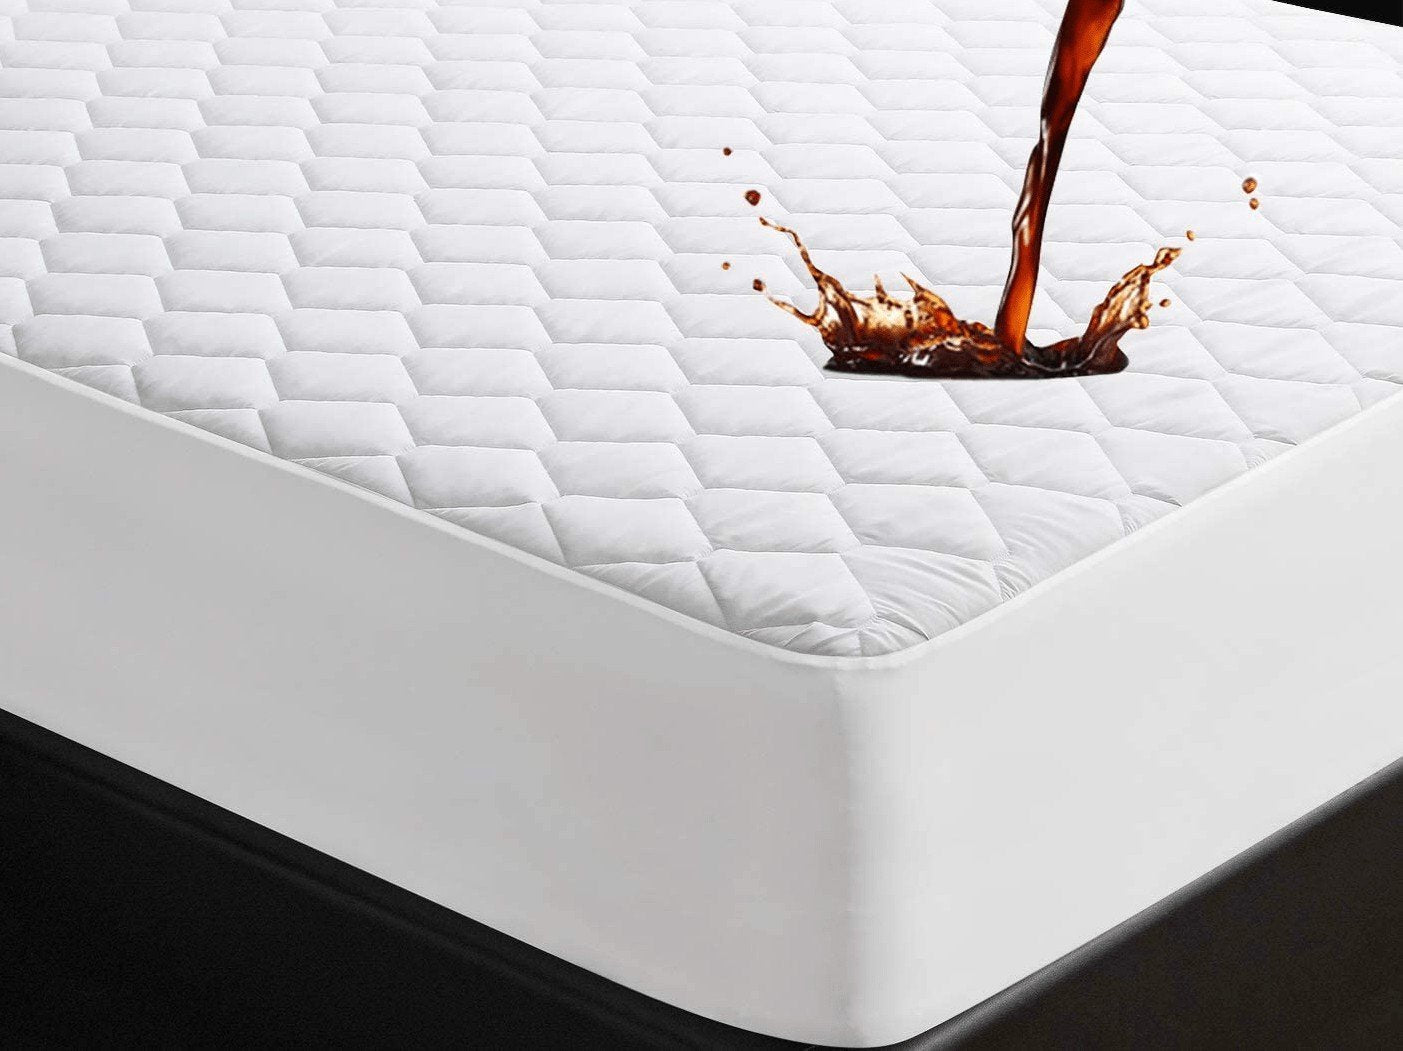 WATERPROOF QUILTED MATTRESS PROTECTOR 30 CM BOX 100% COTTON DUST MITE SOFT HYPOALLERGENIC Bed and Bath Linen